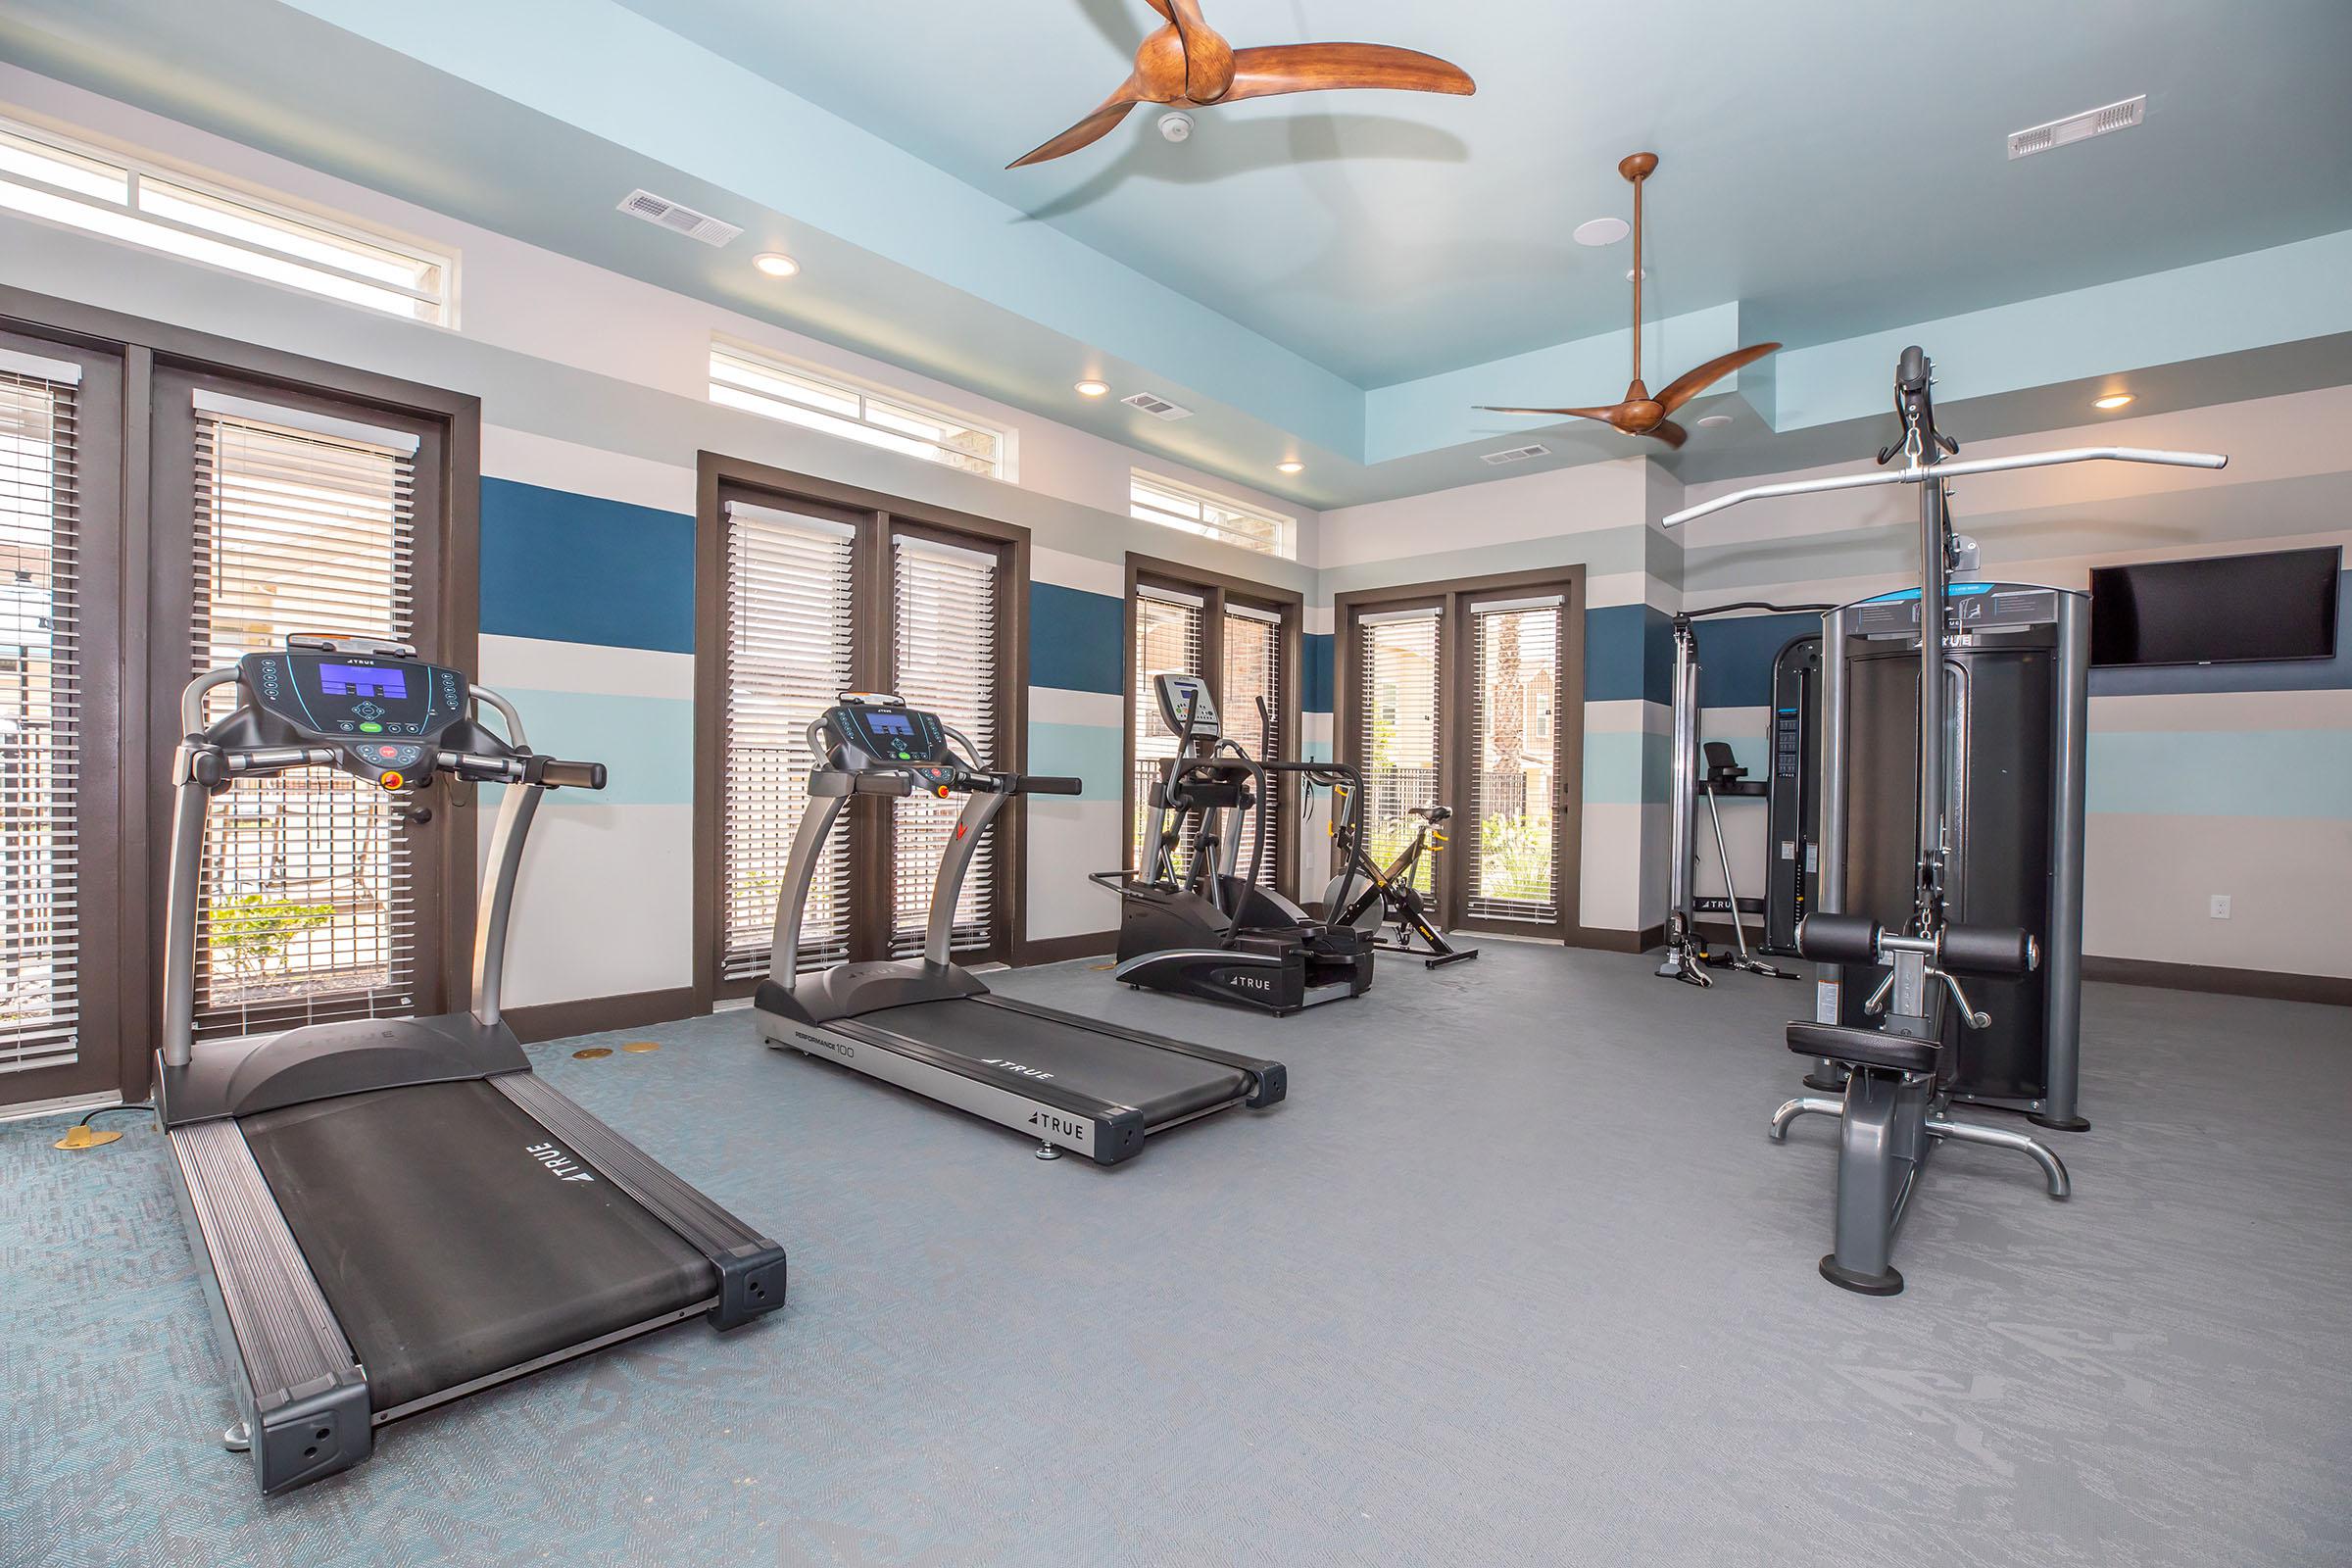 24-HOUR FITNESS CENTER AT THE RESERVE AT PINEWOOD VILLAGE